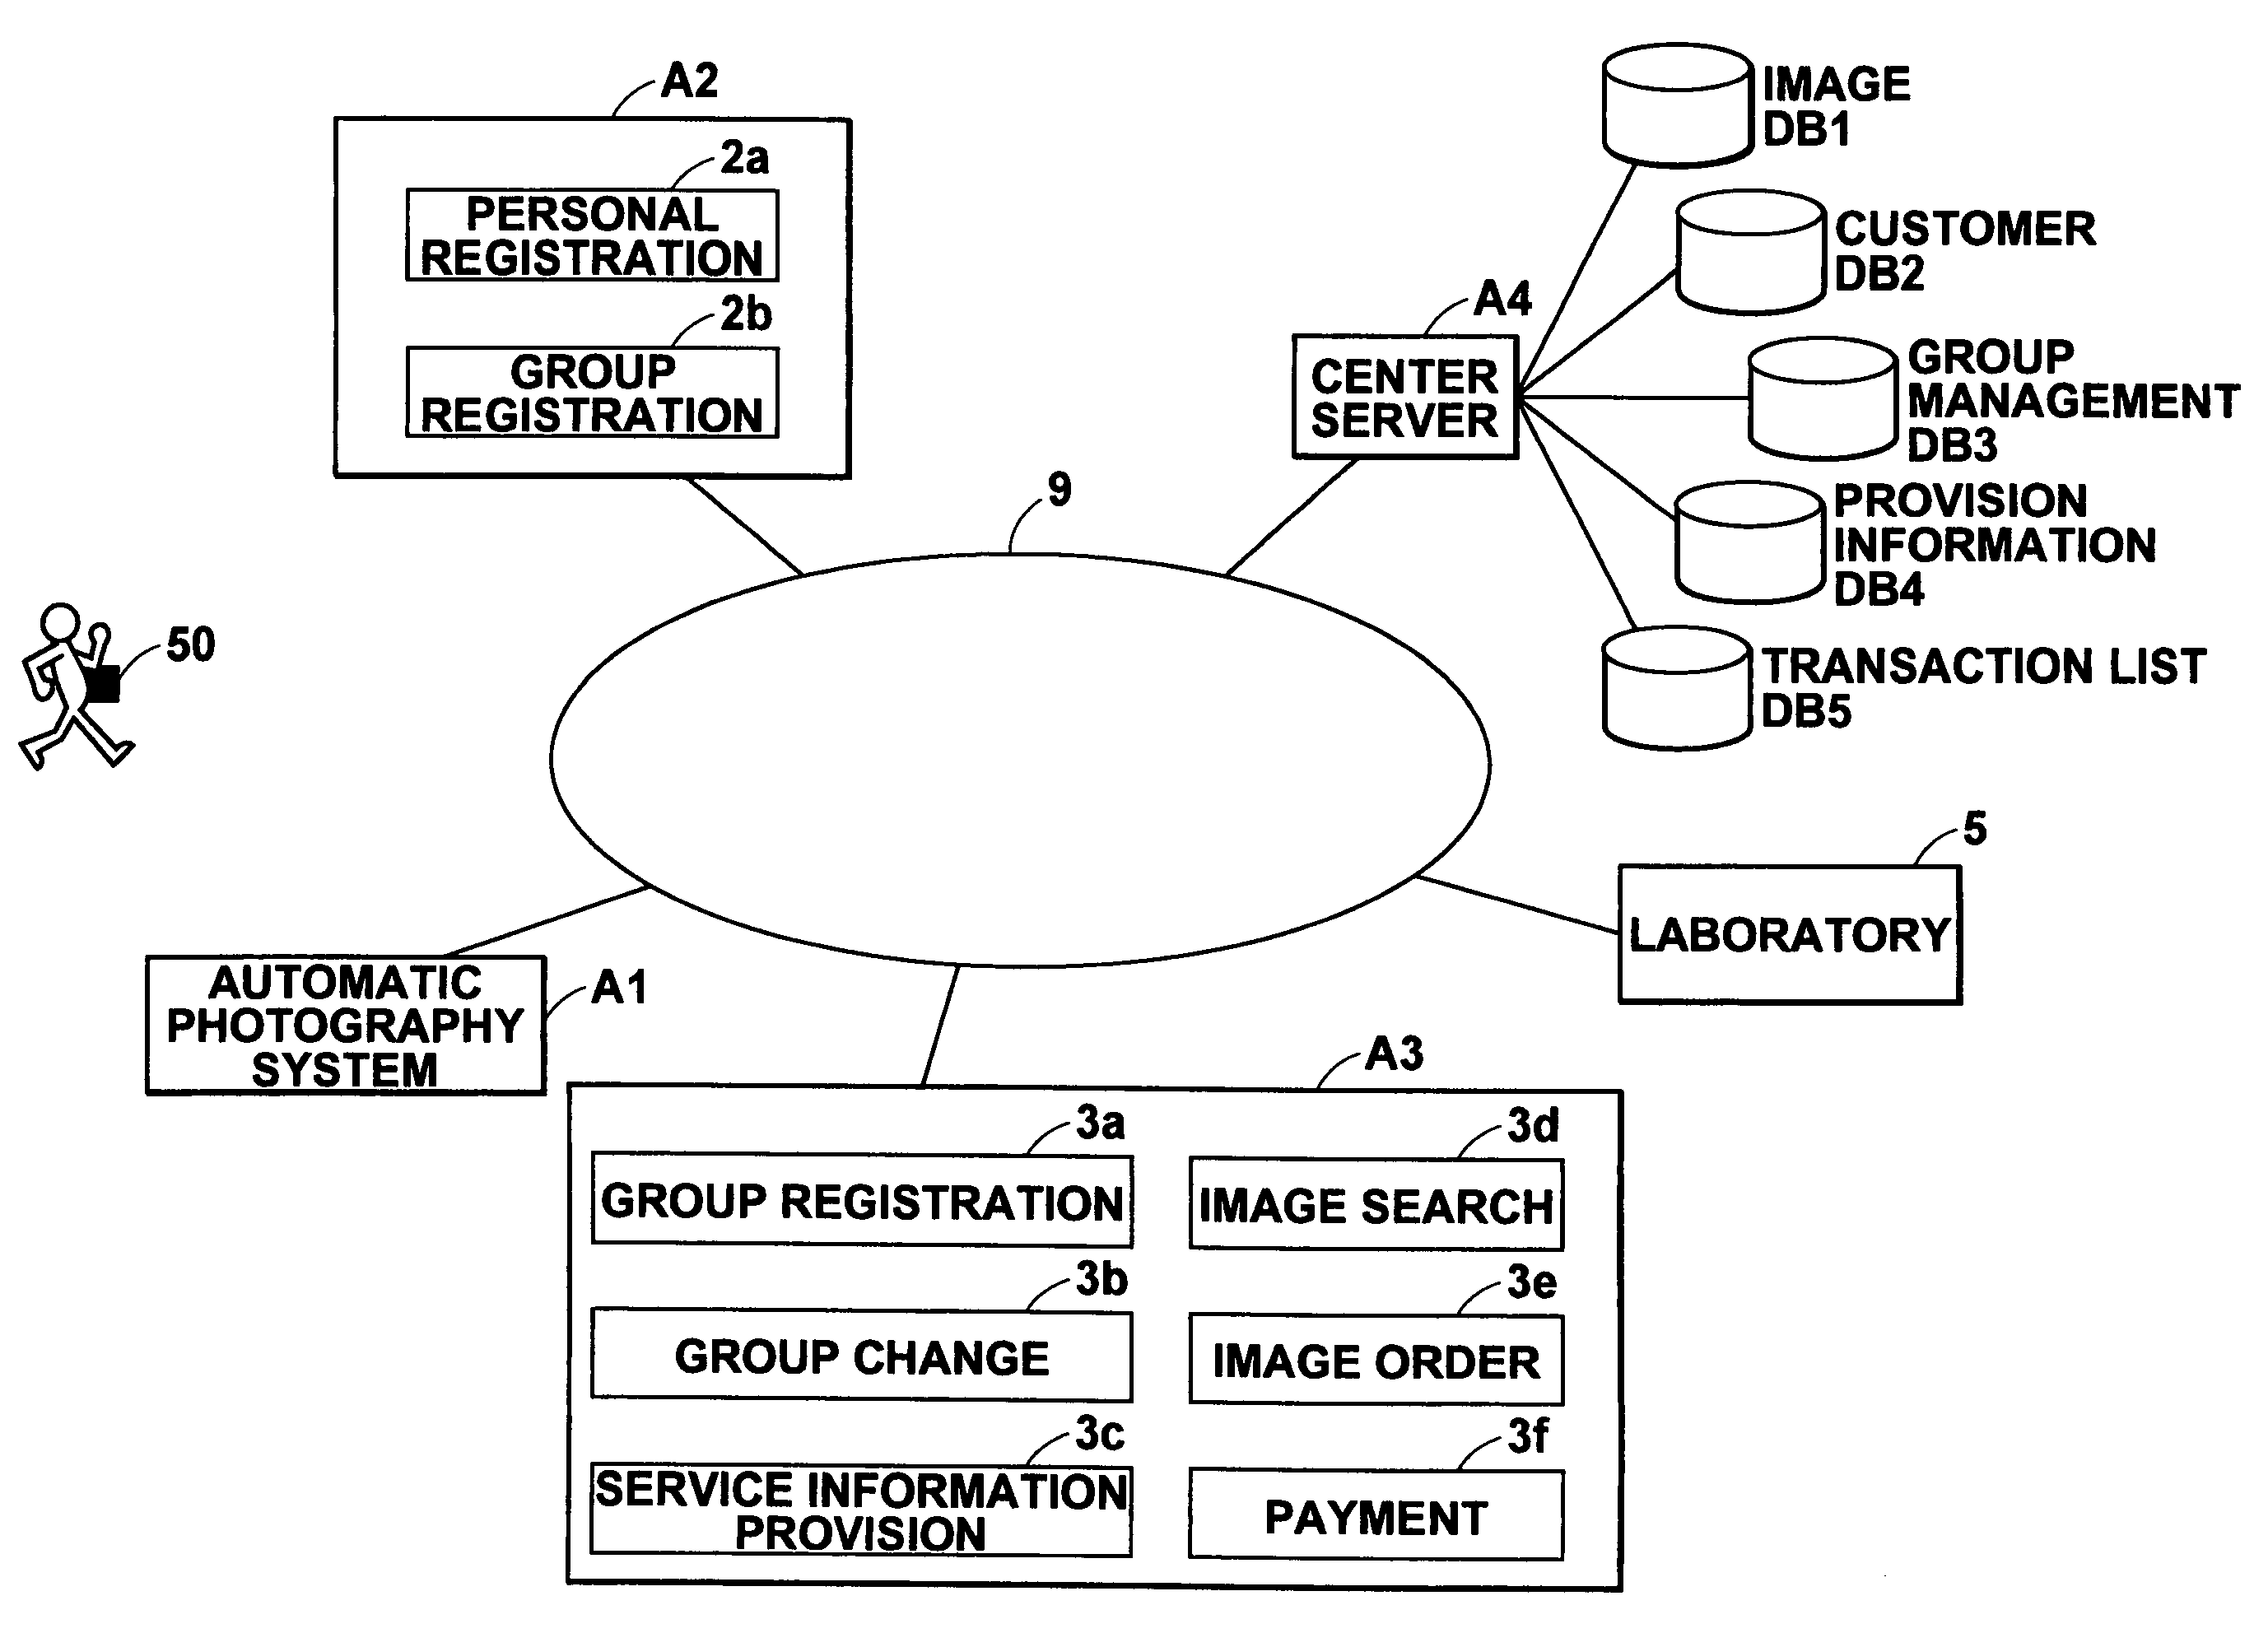 Service provision system and automatic photography system